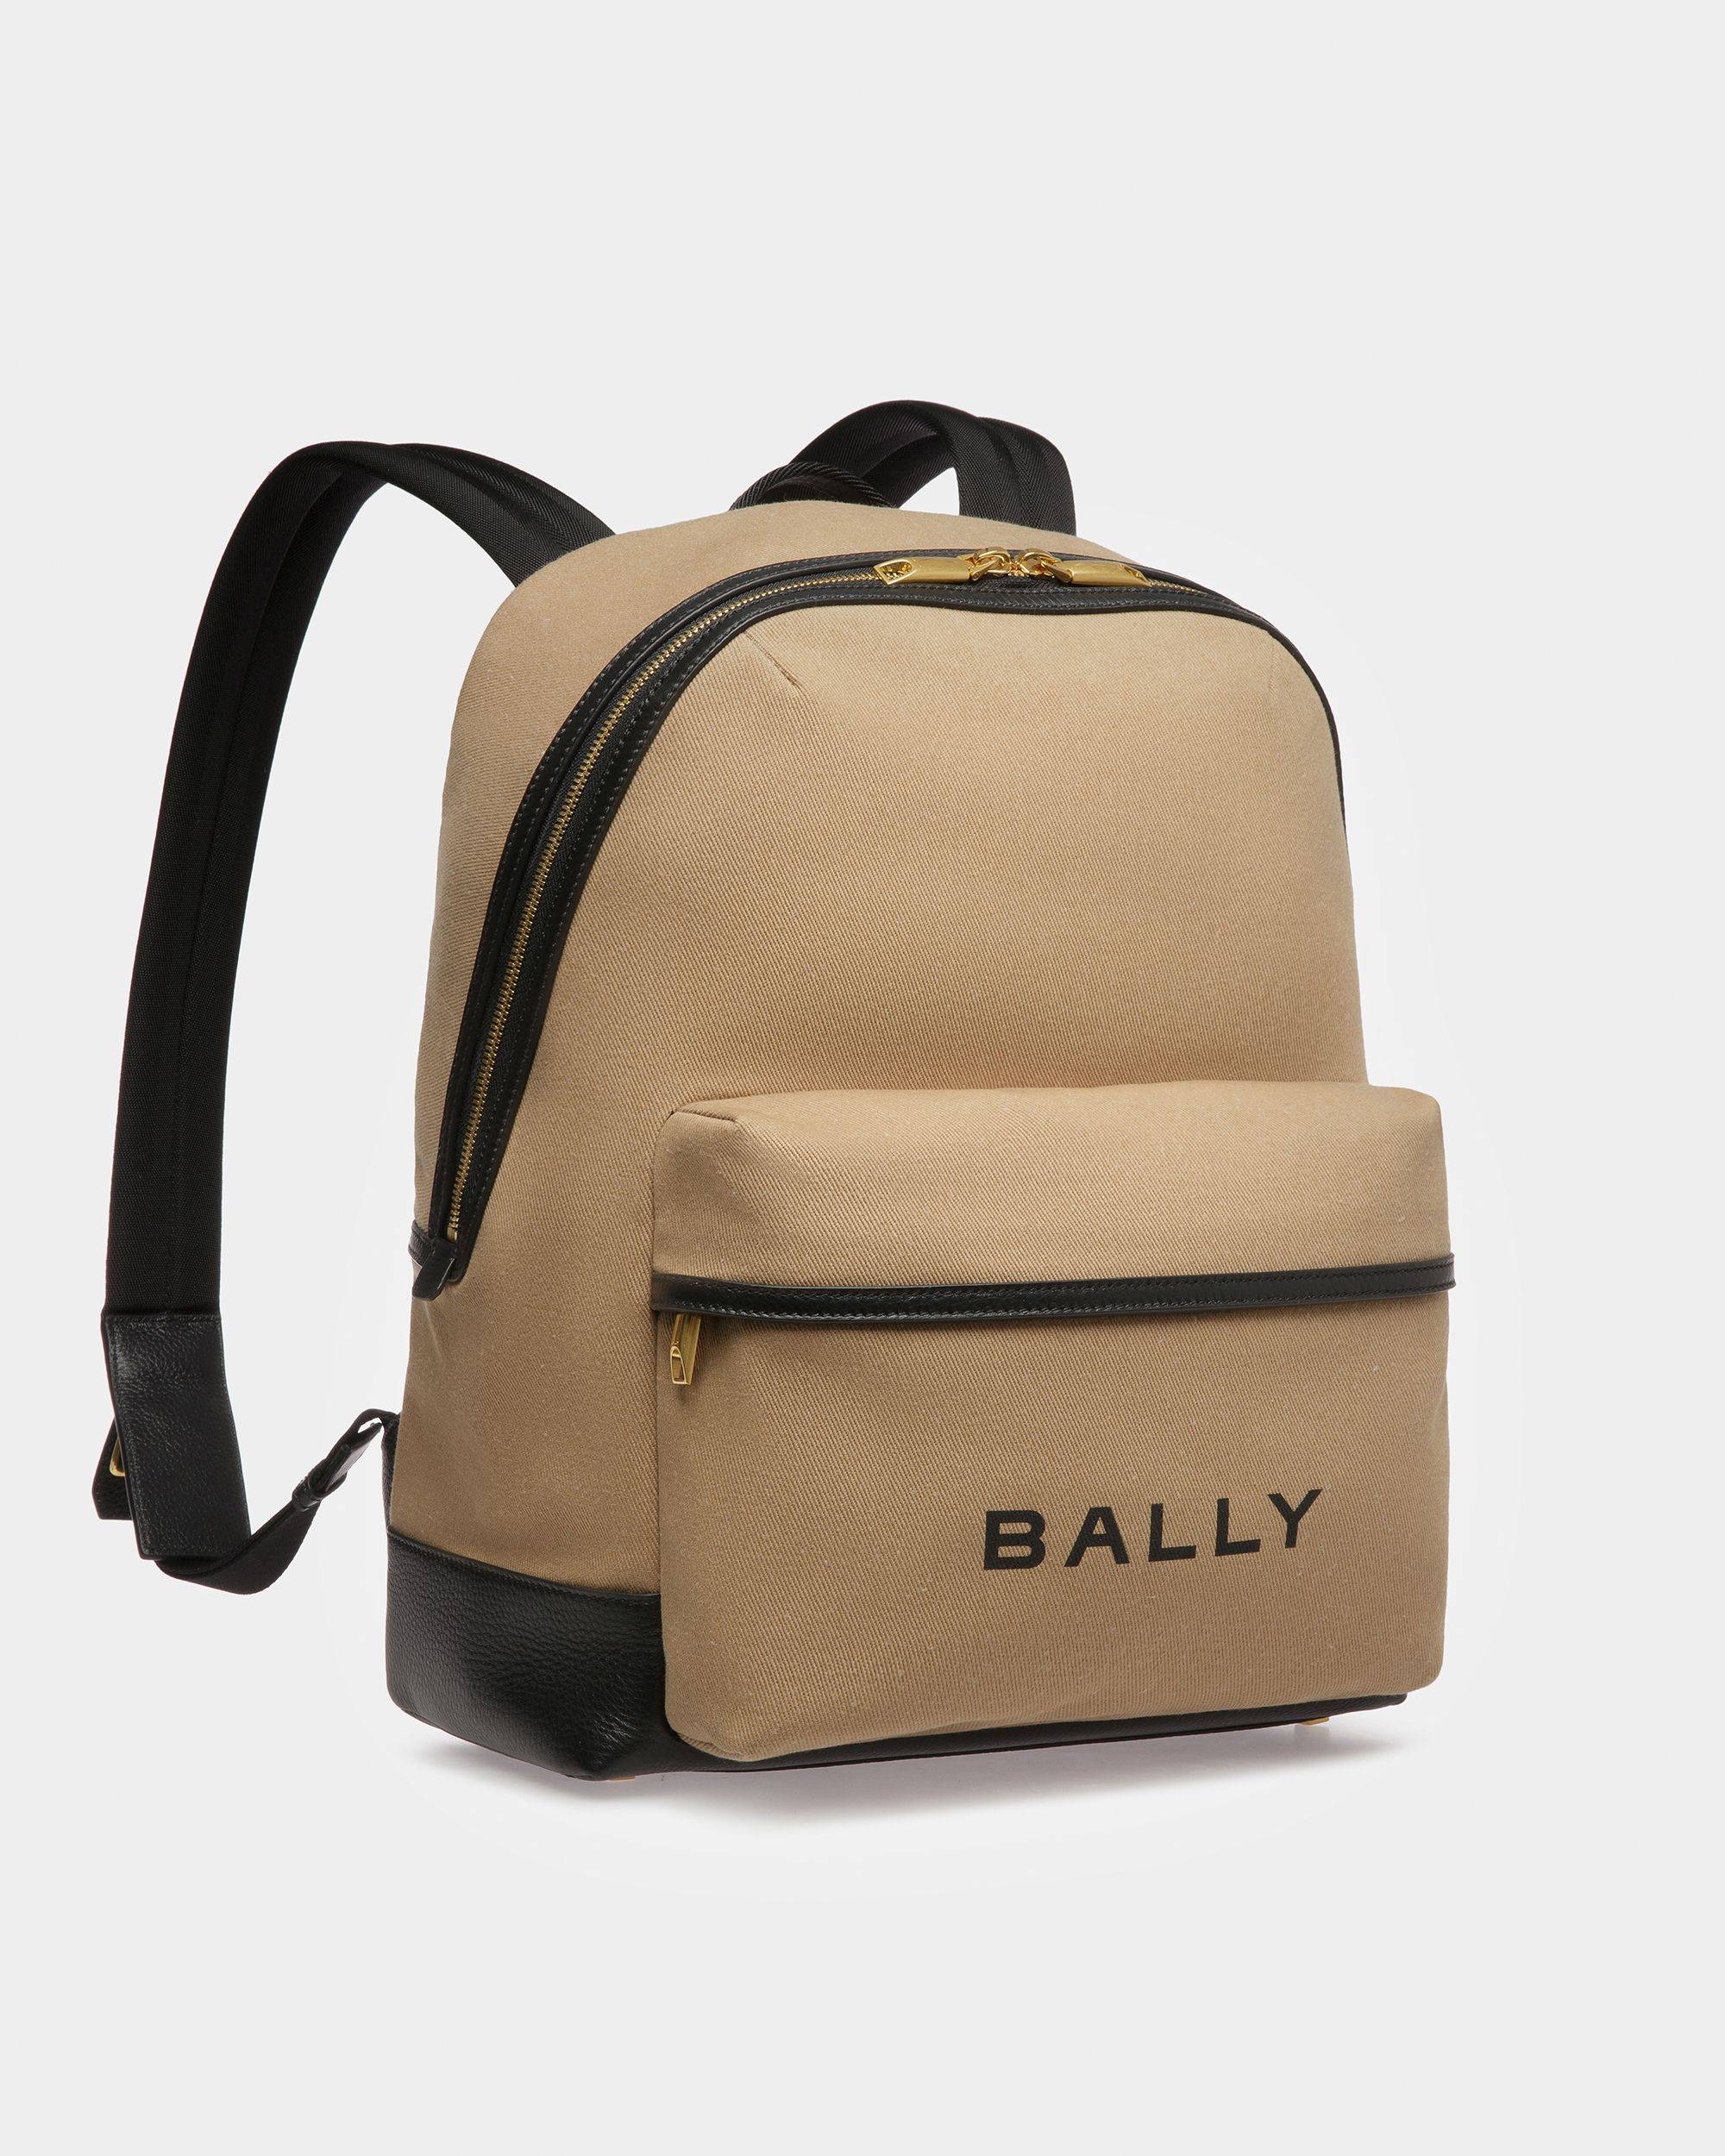 Treck | Men's Backpack | Sand And Black Fabric And Leather | Bally | Still Life 3/4 Front